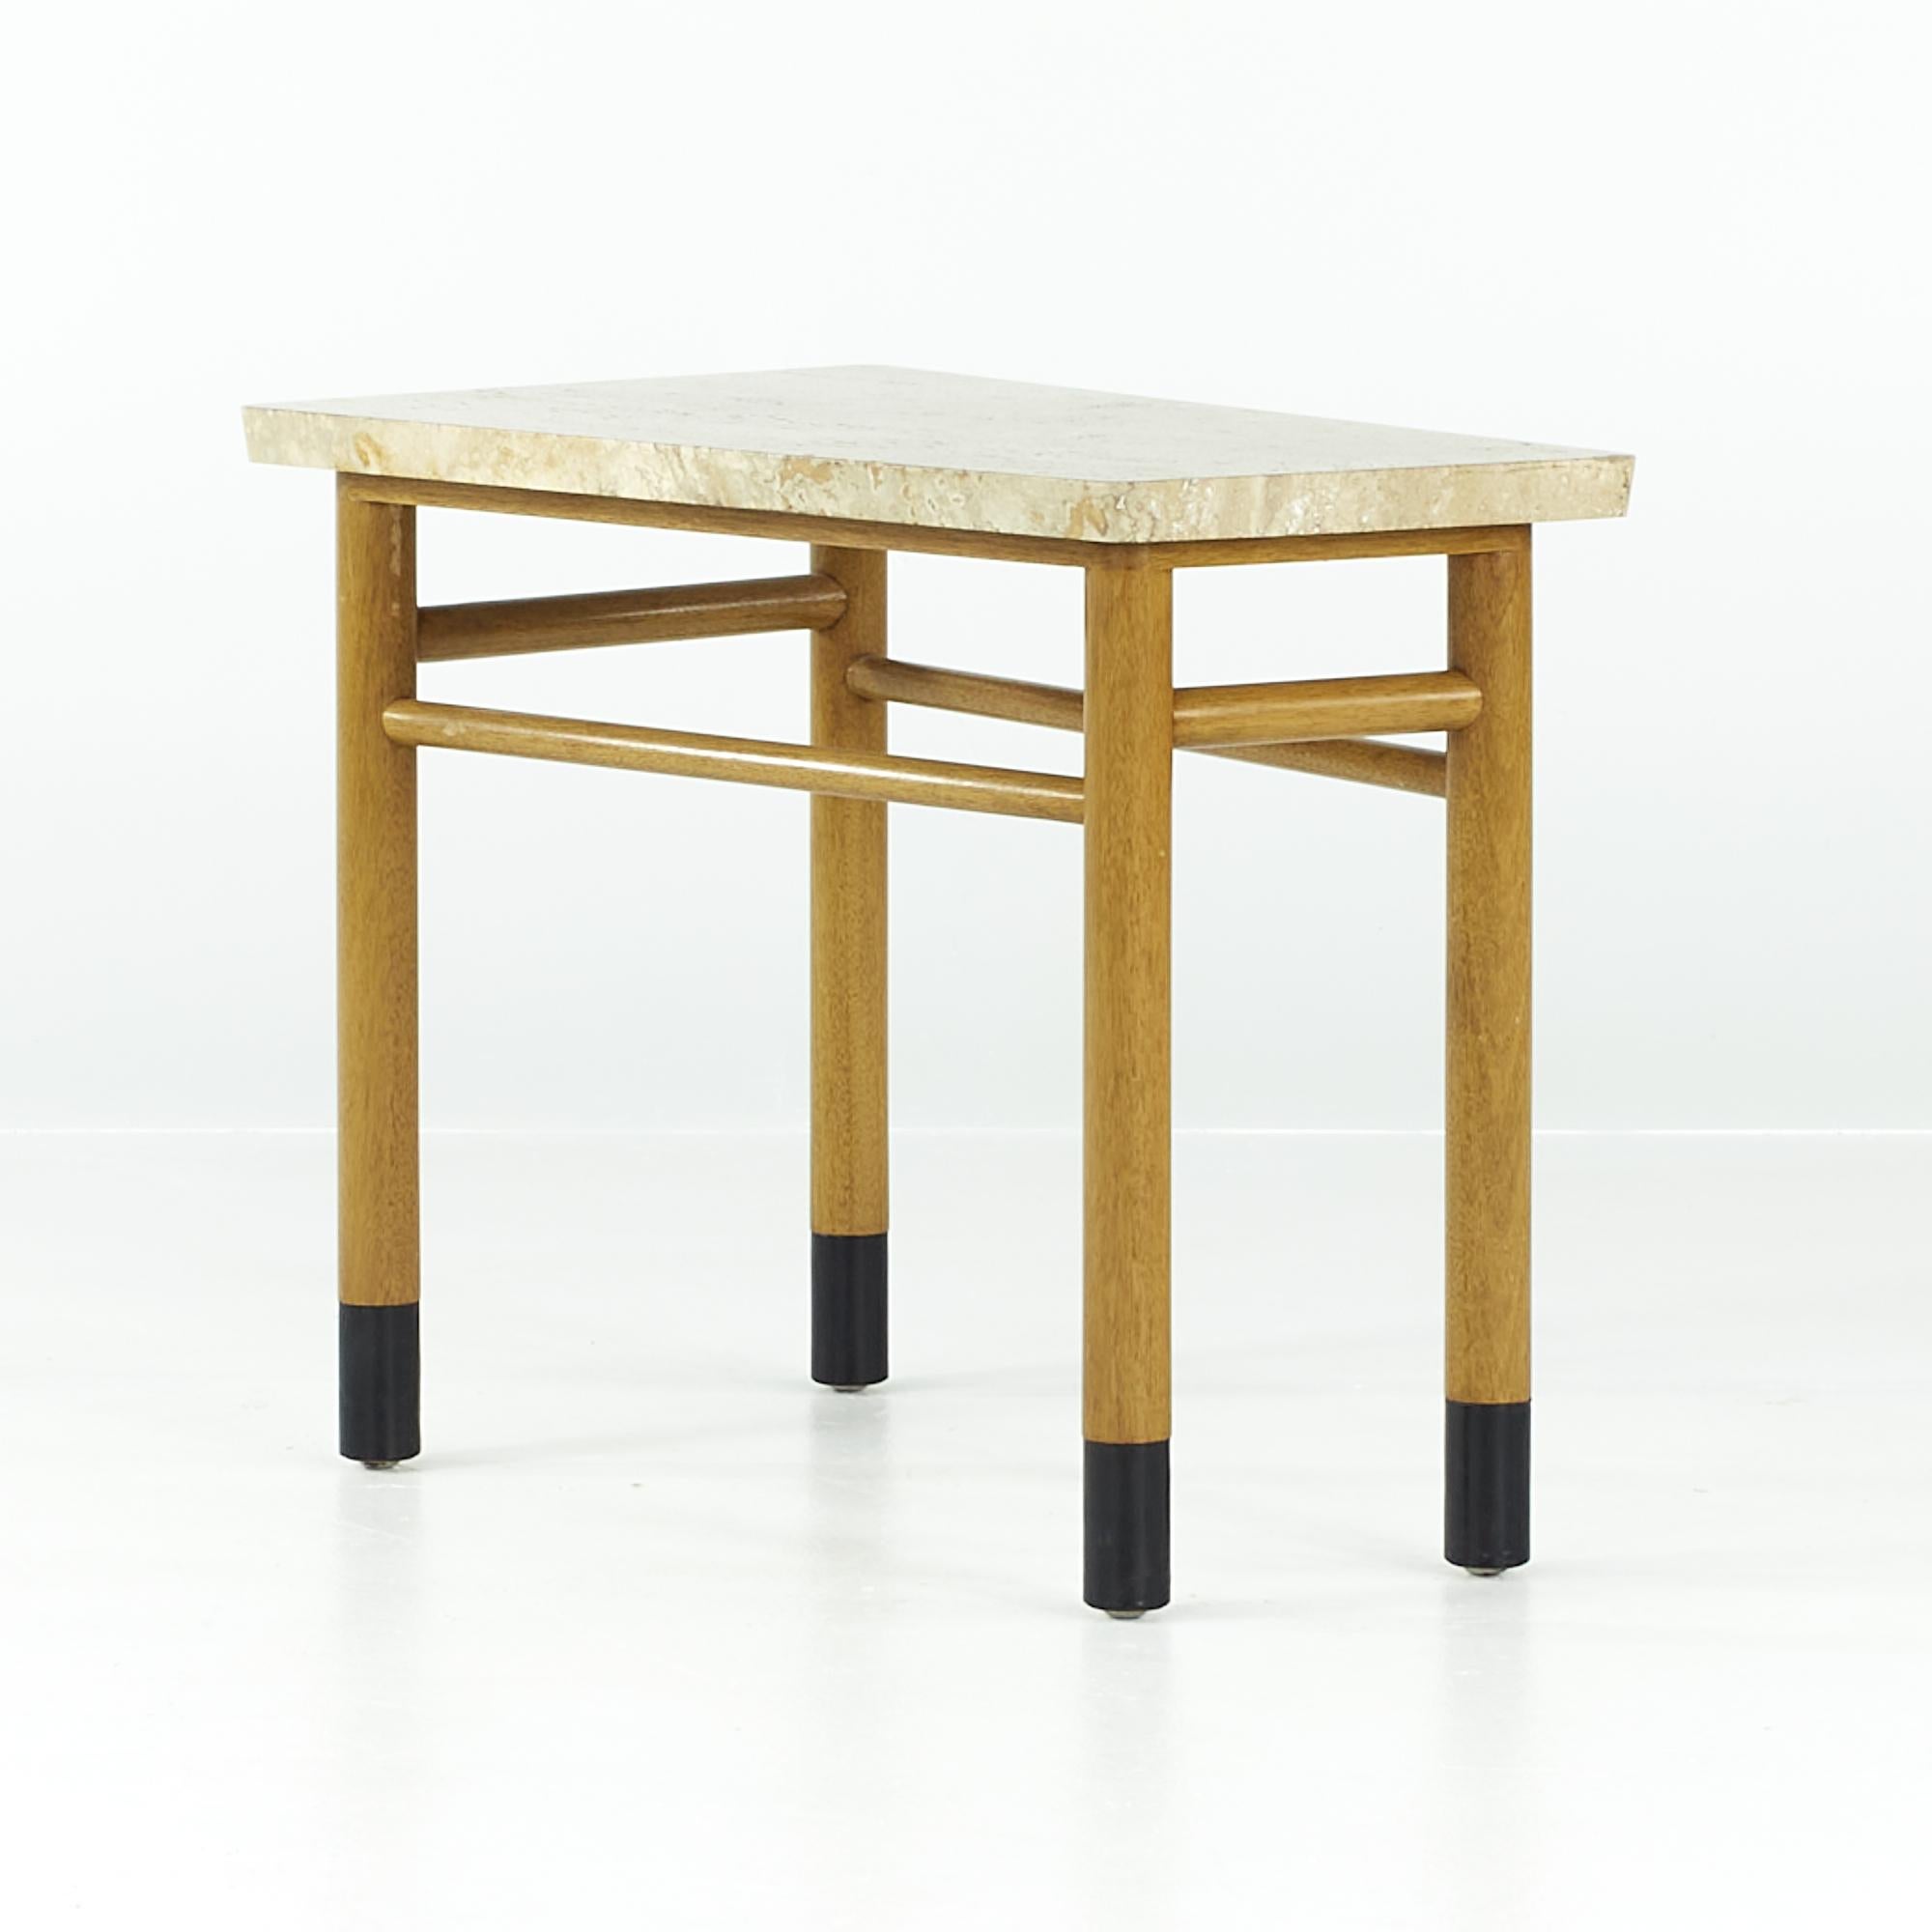 Late 20th Century Edward Wormley for Dunbar Midcentury Travertine Wedge Tables, Pair For Sale